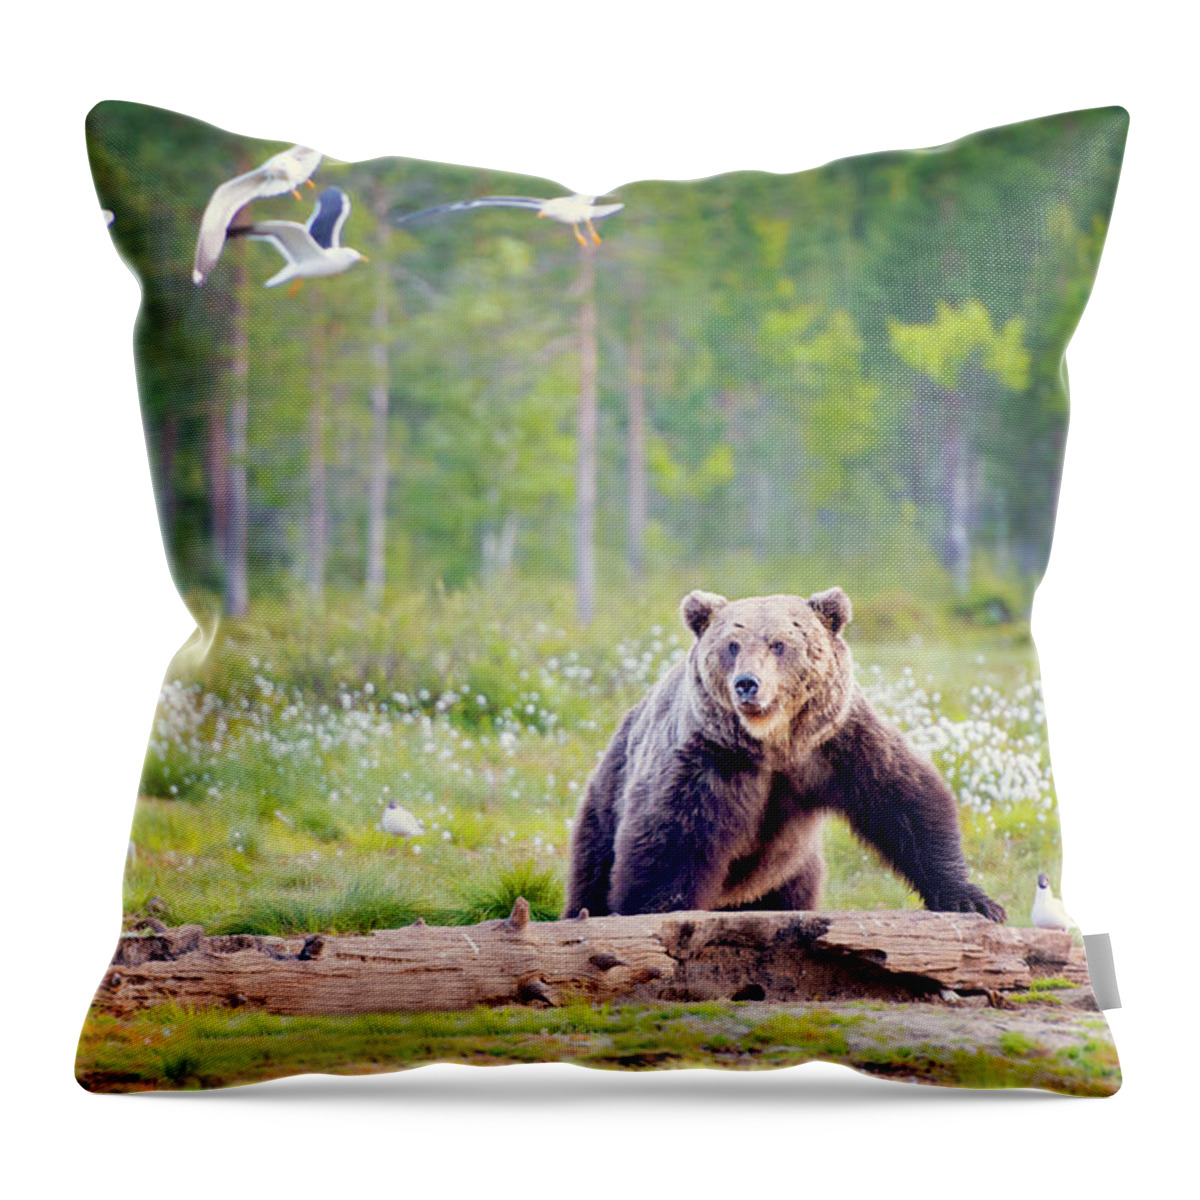 Brown Bear Throw Pillow featuring the photograph Brown Bear Looking At Seagulls In by Laurenepbath